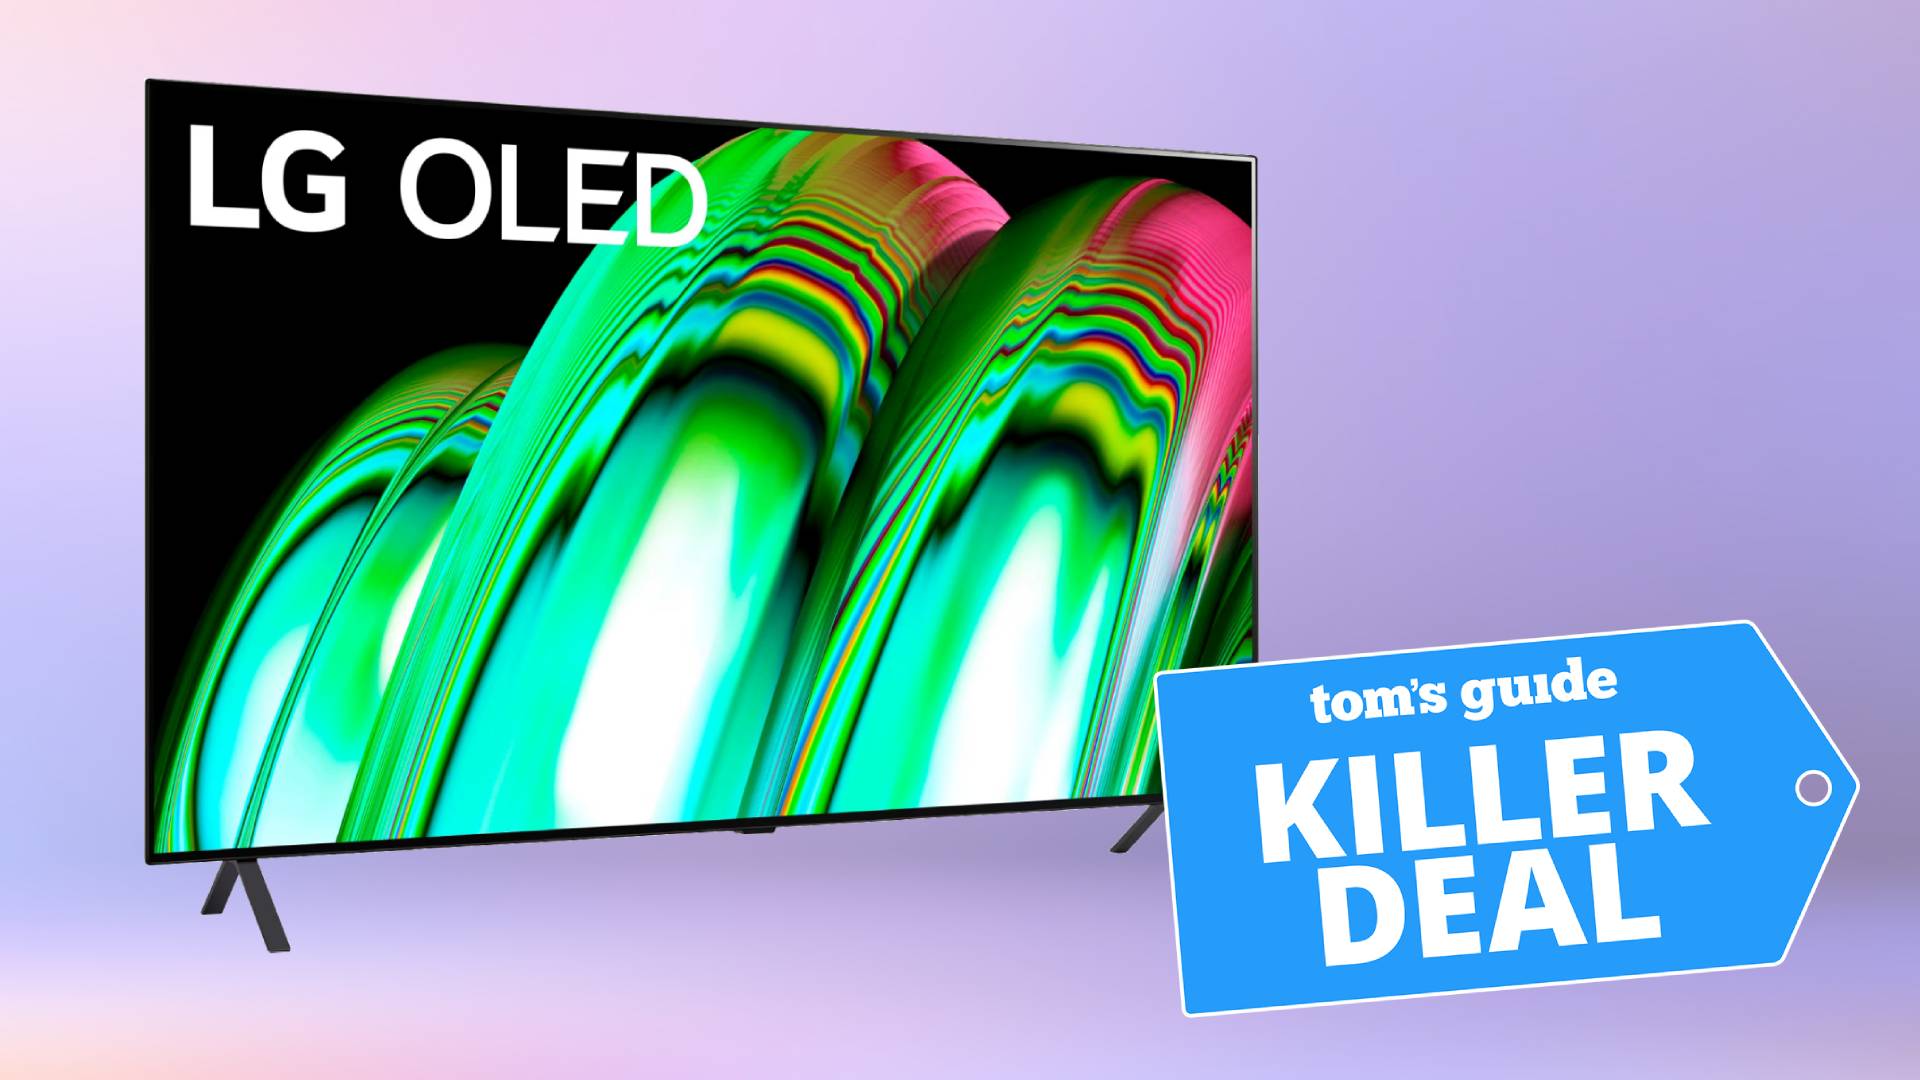 Photo of the LG A2 OLED 4K TV on a purple background